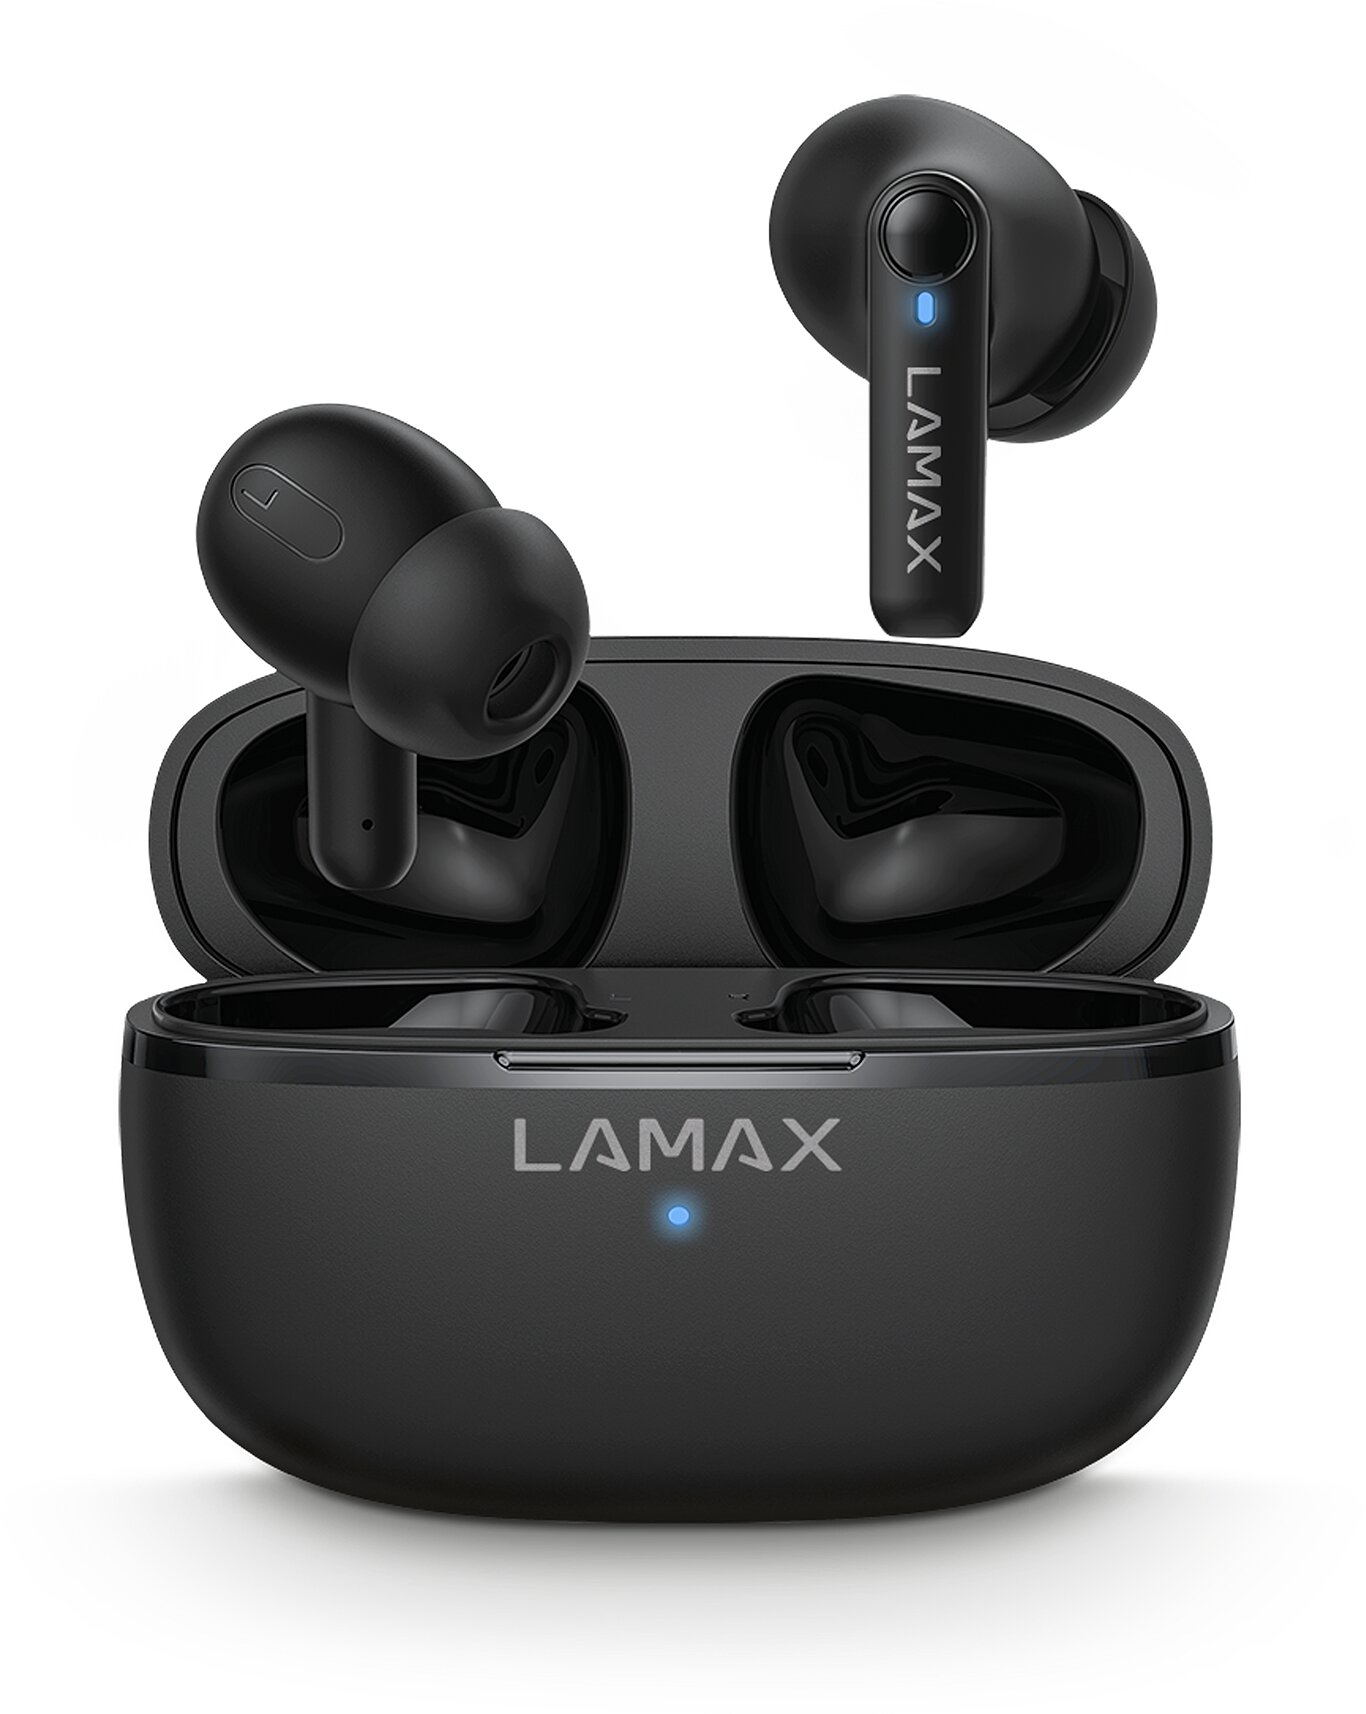 LAMAX Clips1 Play Black - Unparalleled audio and style